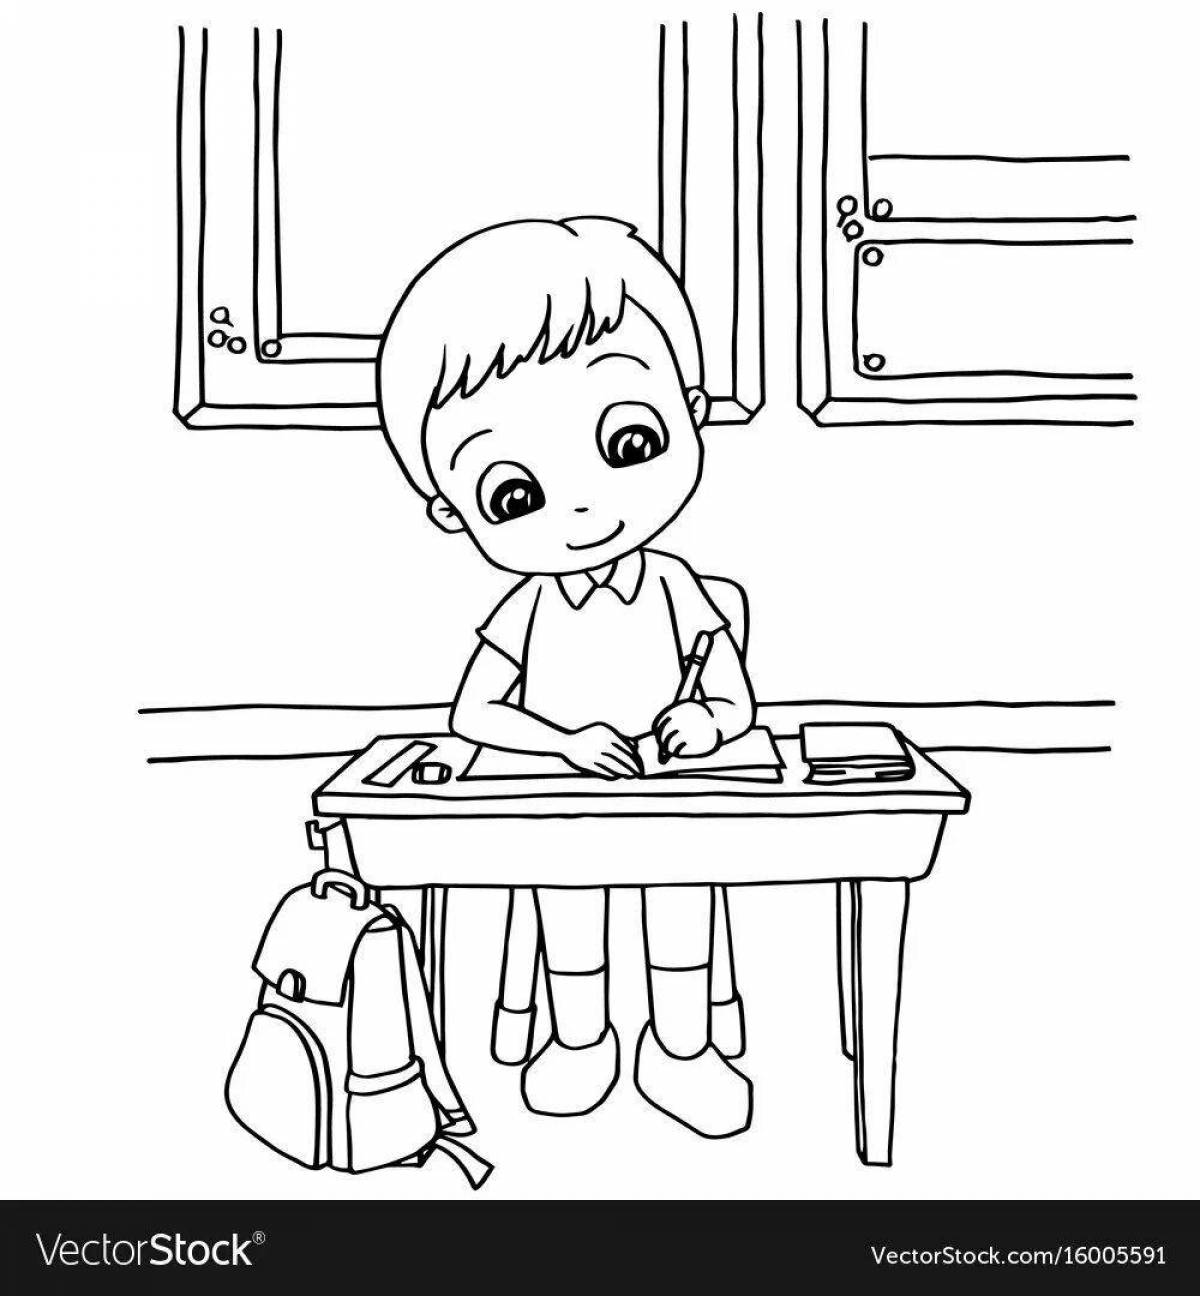 Student coloring book for children